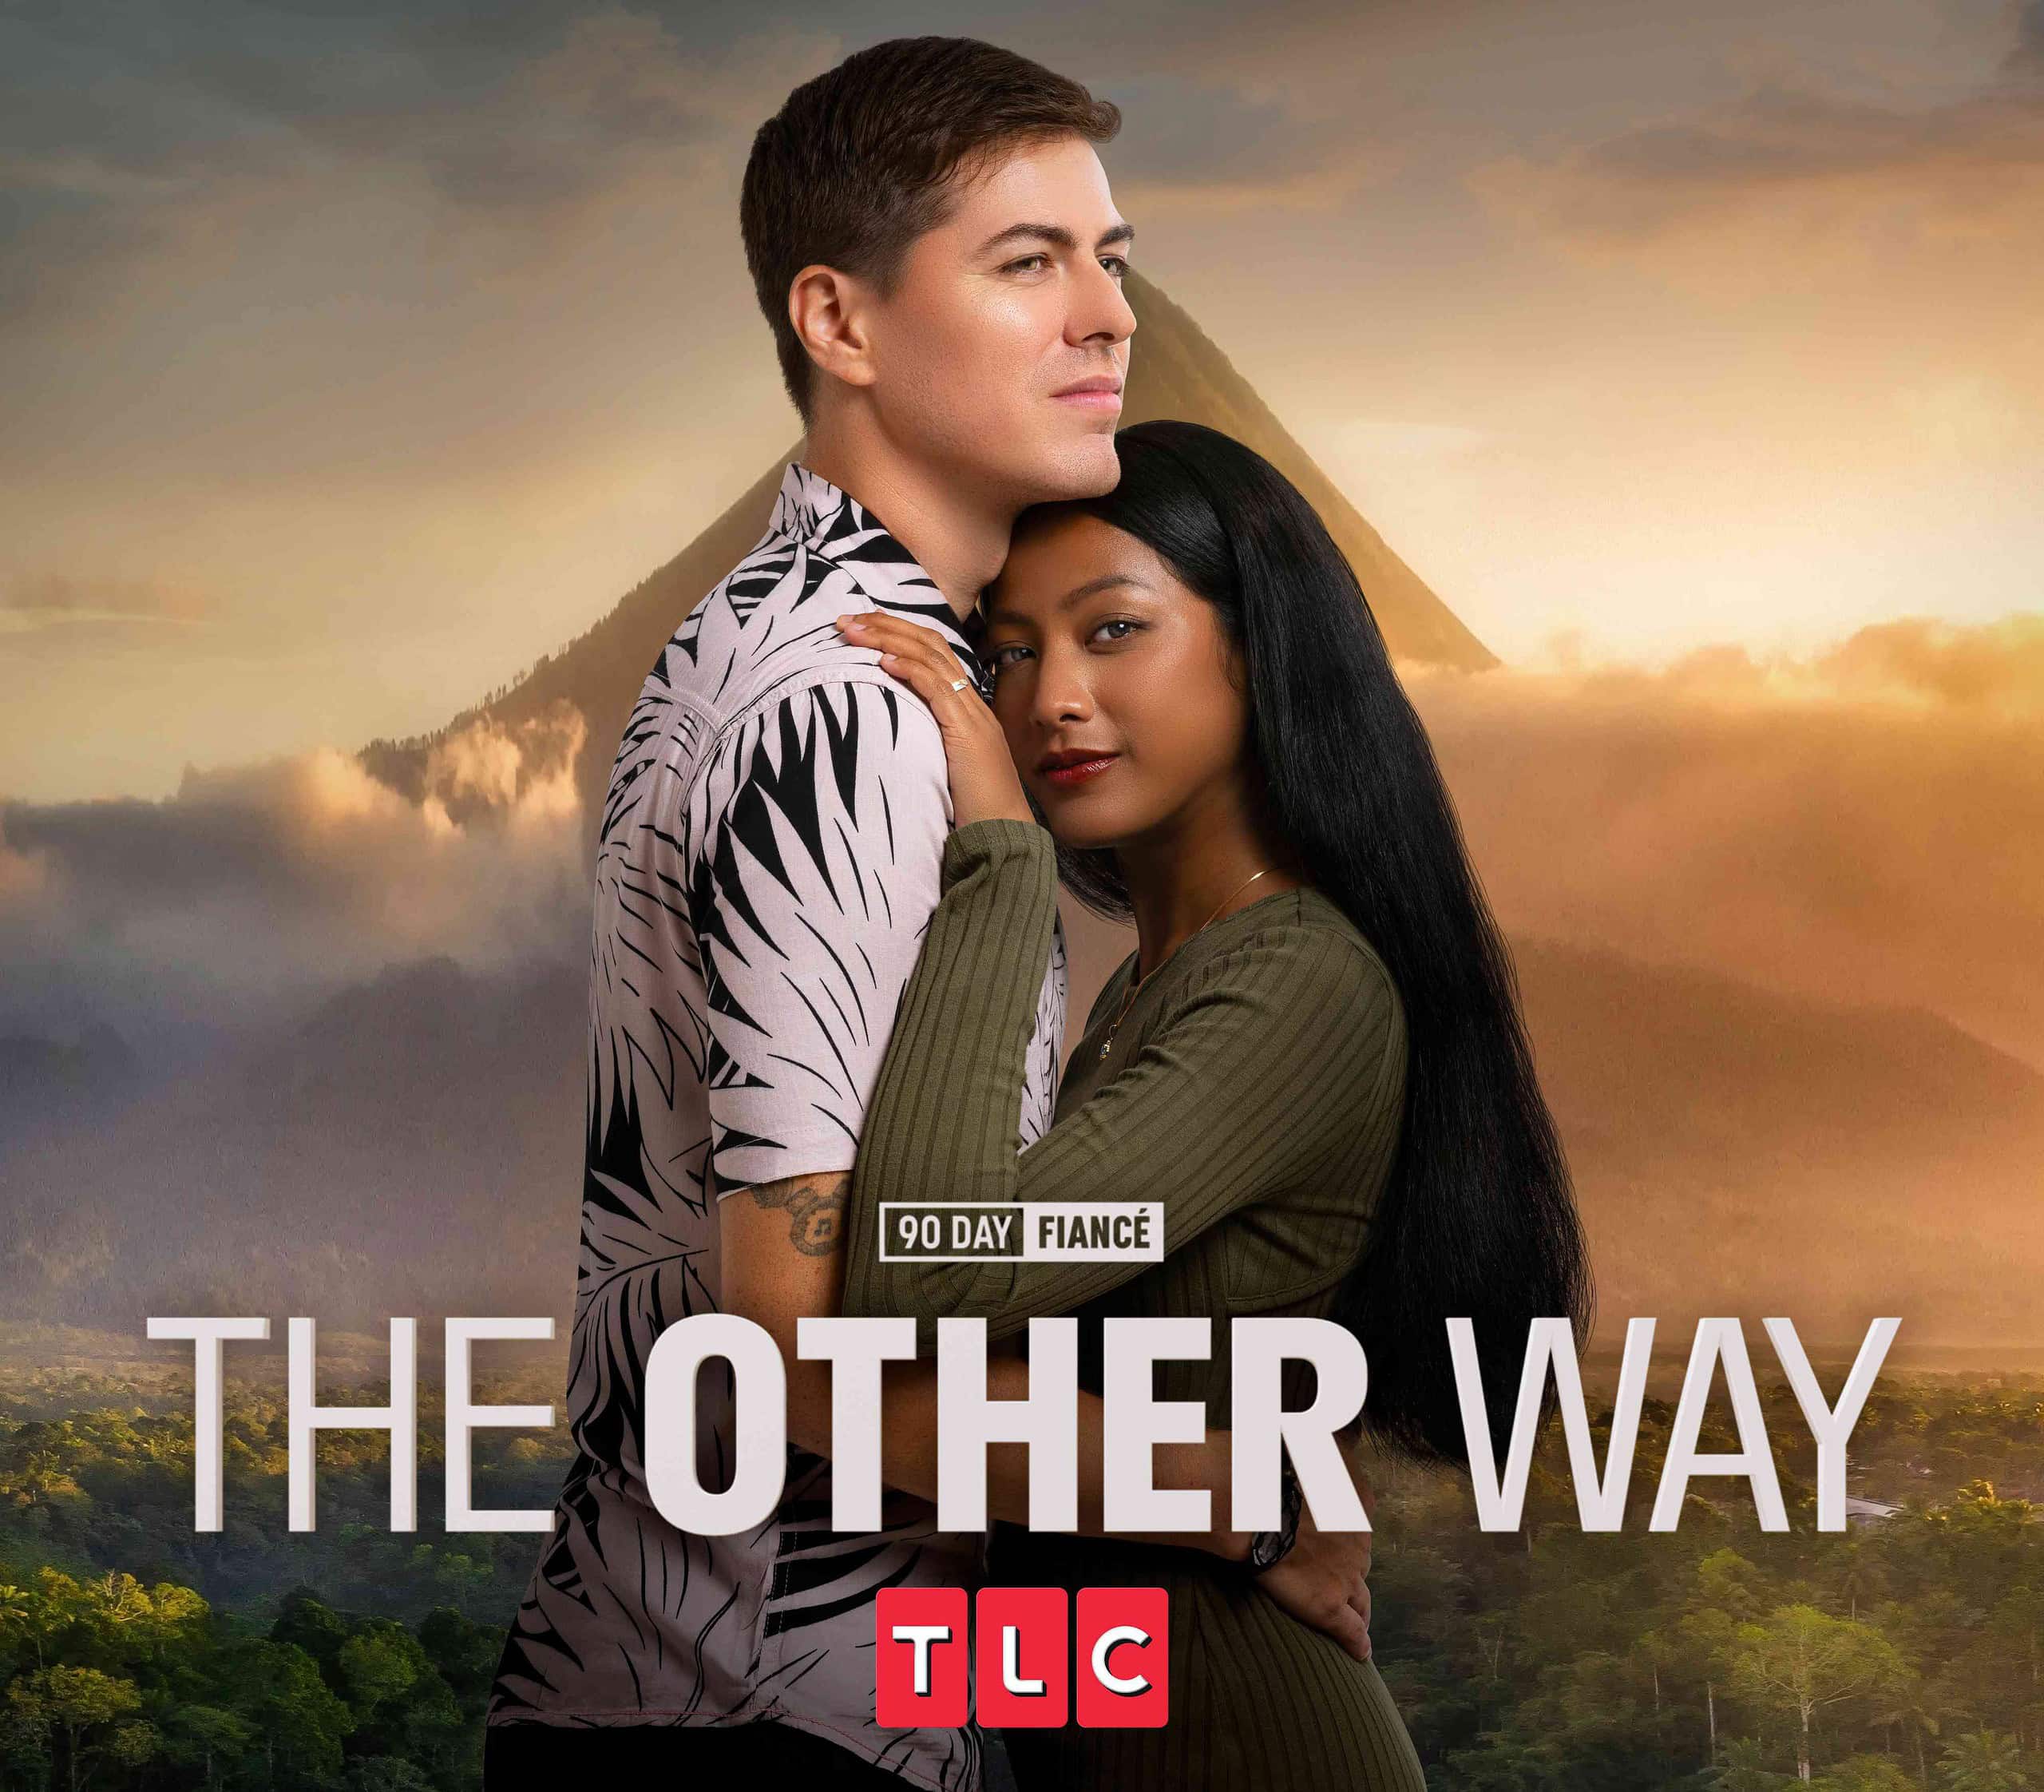 90 Day Fiancé The Other Way Brings New Adventures and Challenges This Summer